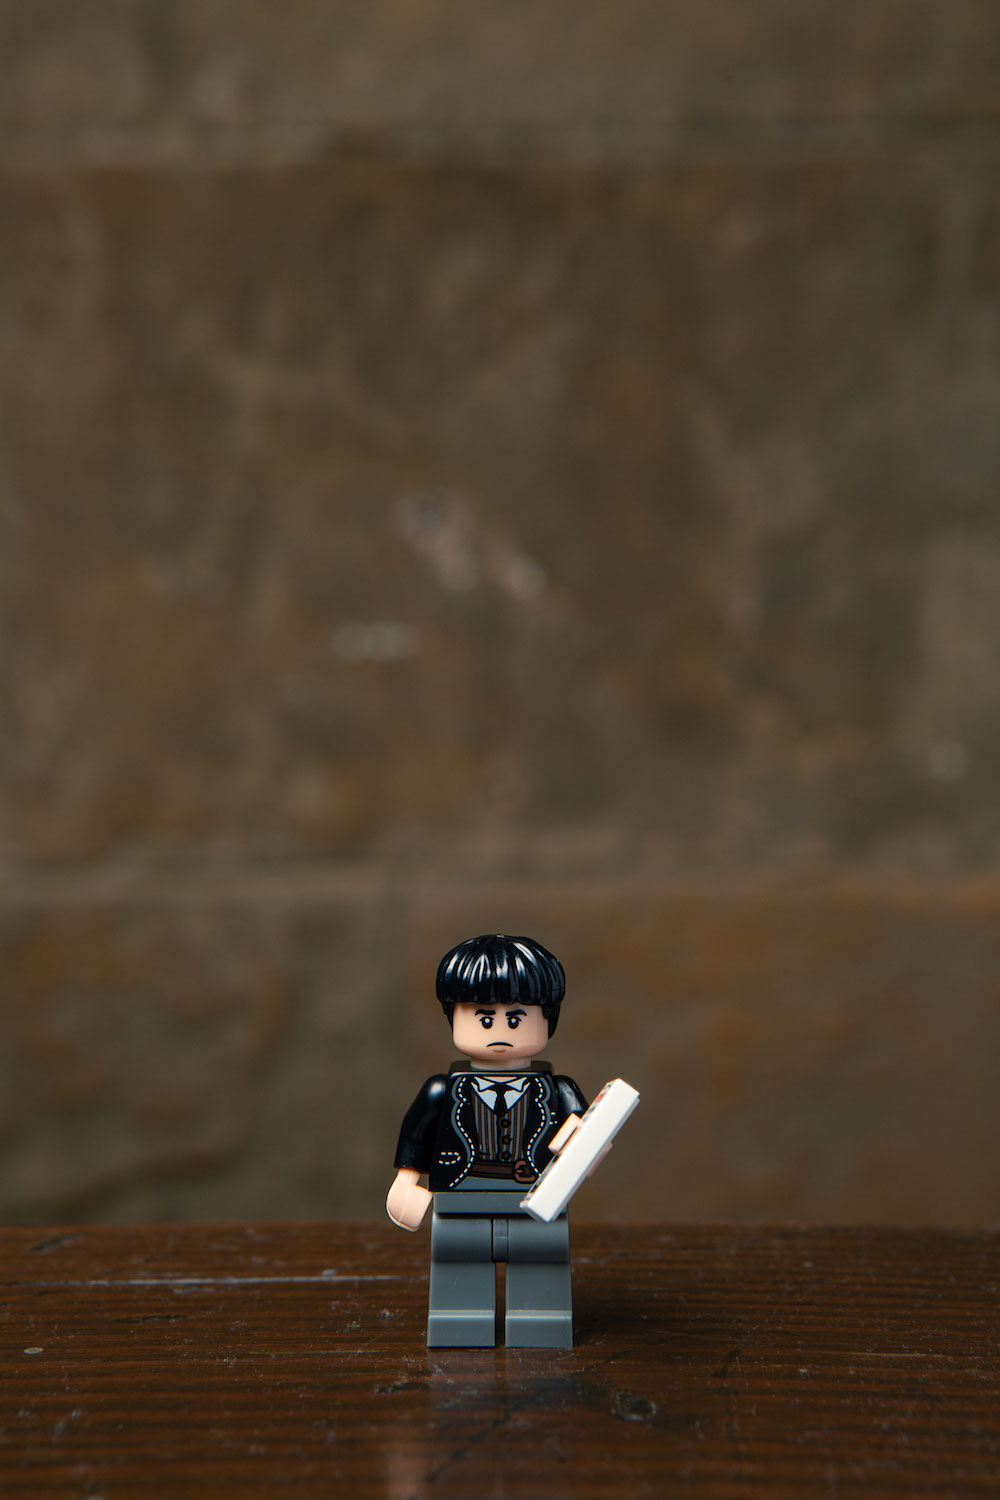 Credence’s LEGO minifigure includes one of his stepmother’s flyers (ugh, the heartache).